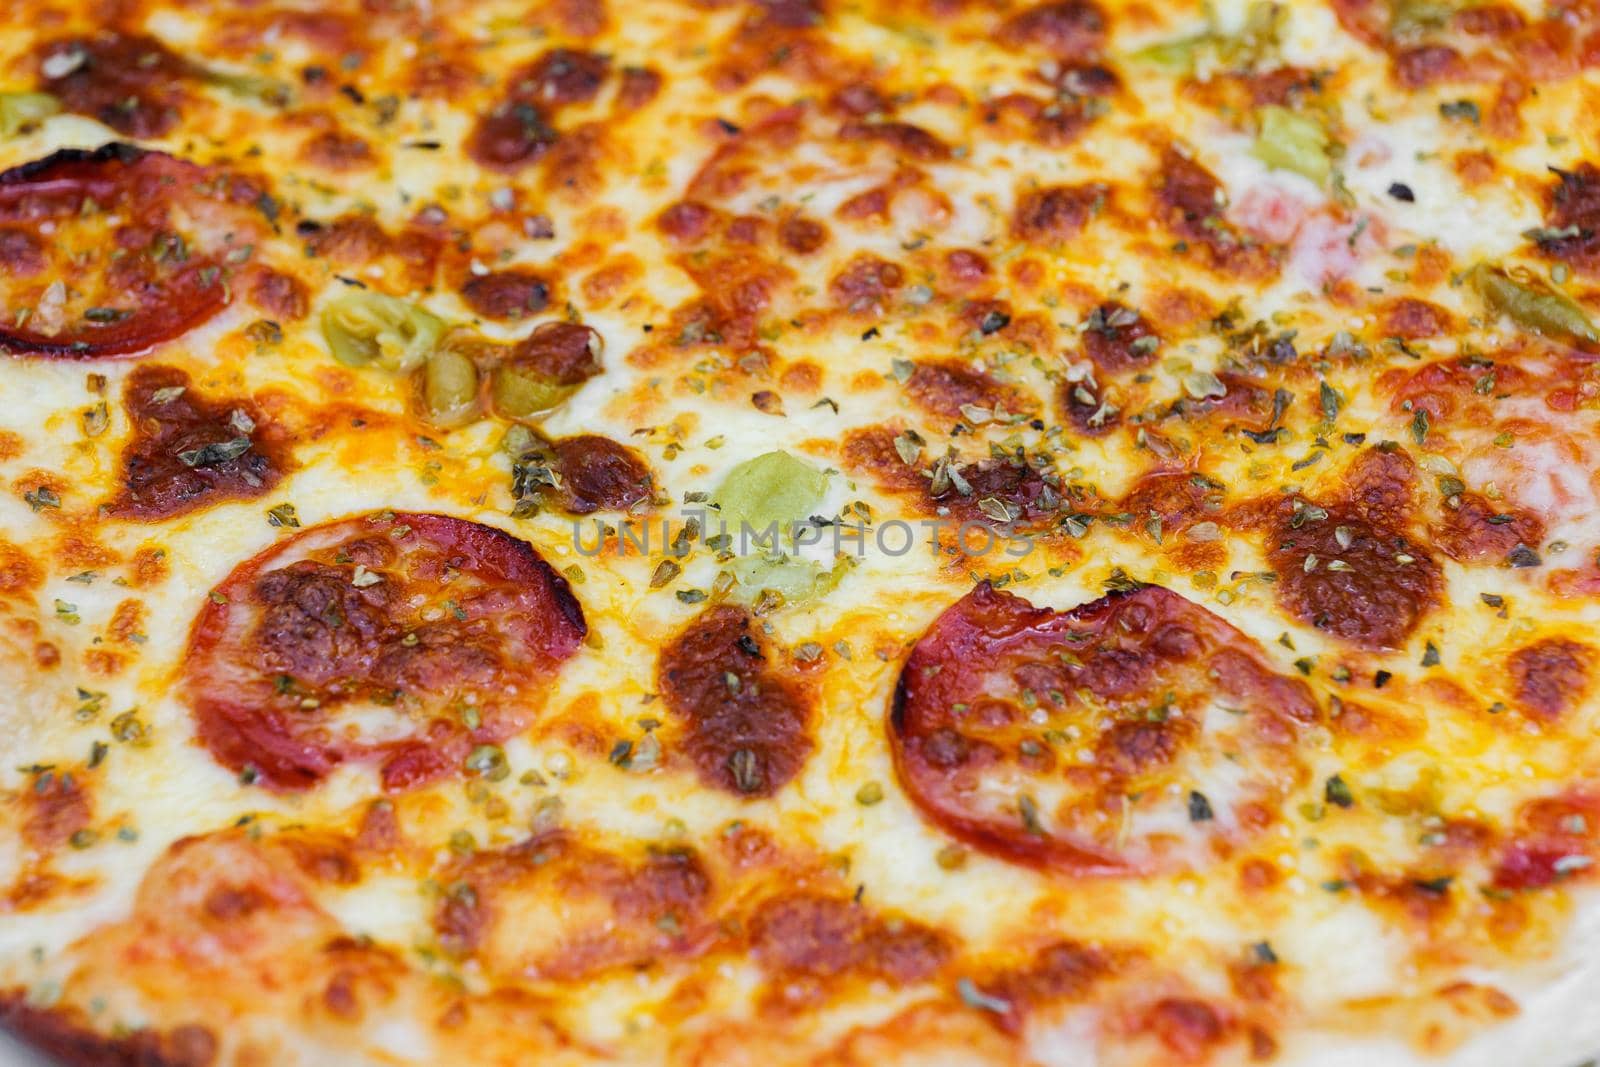 Close-up of pizza topped with salami, cheese and oregano